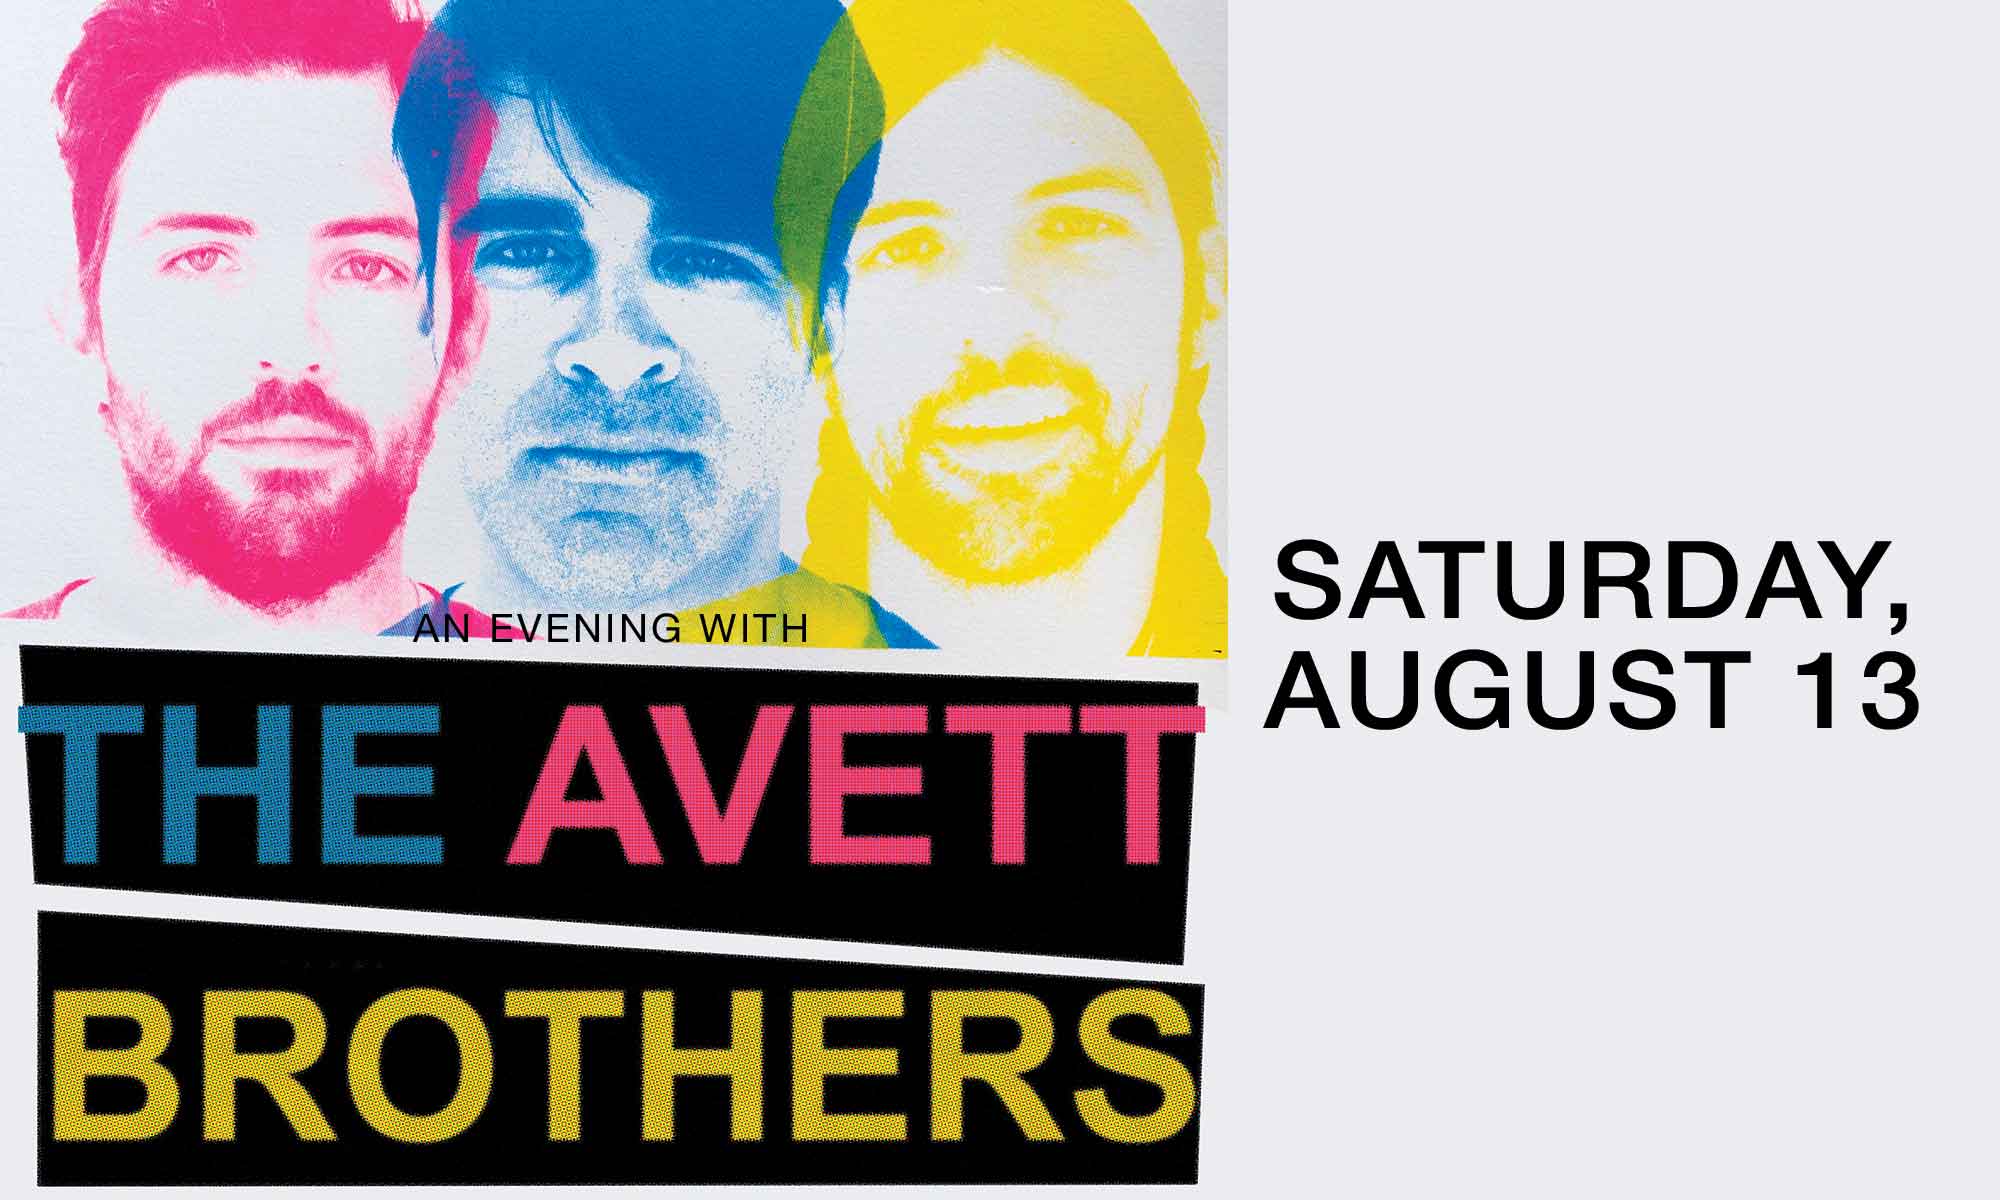 The Avett Brothers at Coney Island Amphitheater on 08-13-16